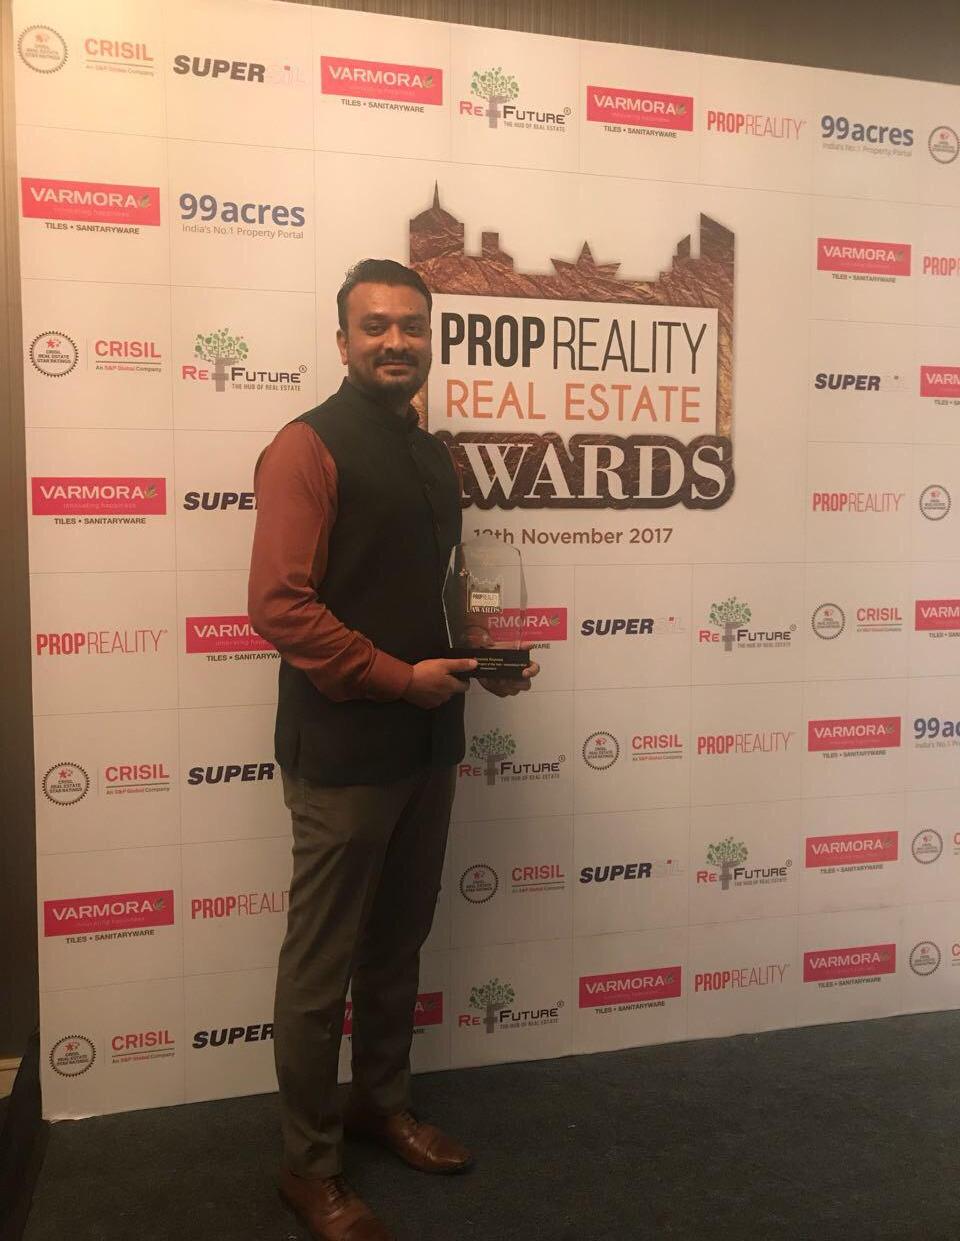 Suryam Repose awarded as Best Weekend Home Project in Prop Reality Real Estate Awards 2017 Update